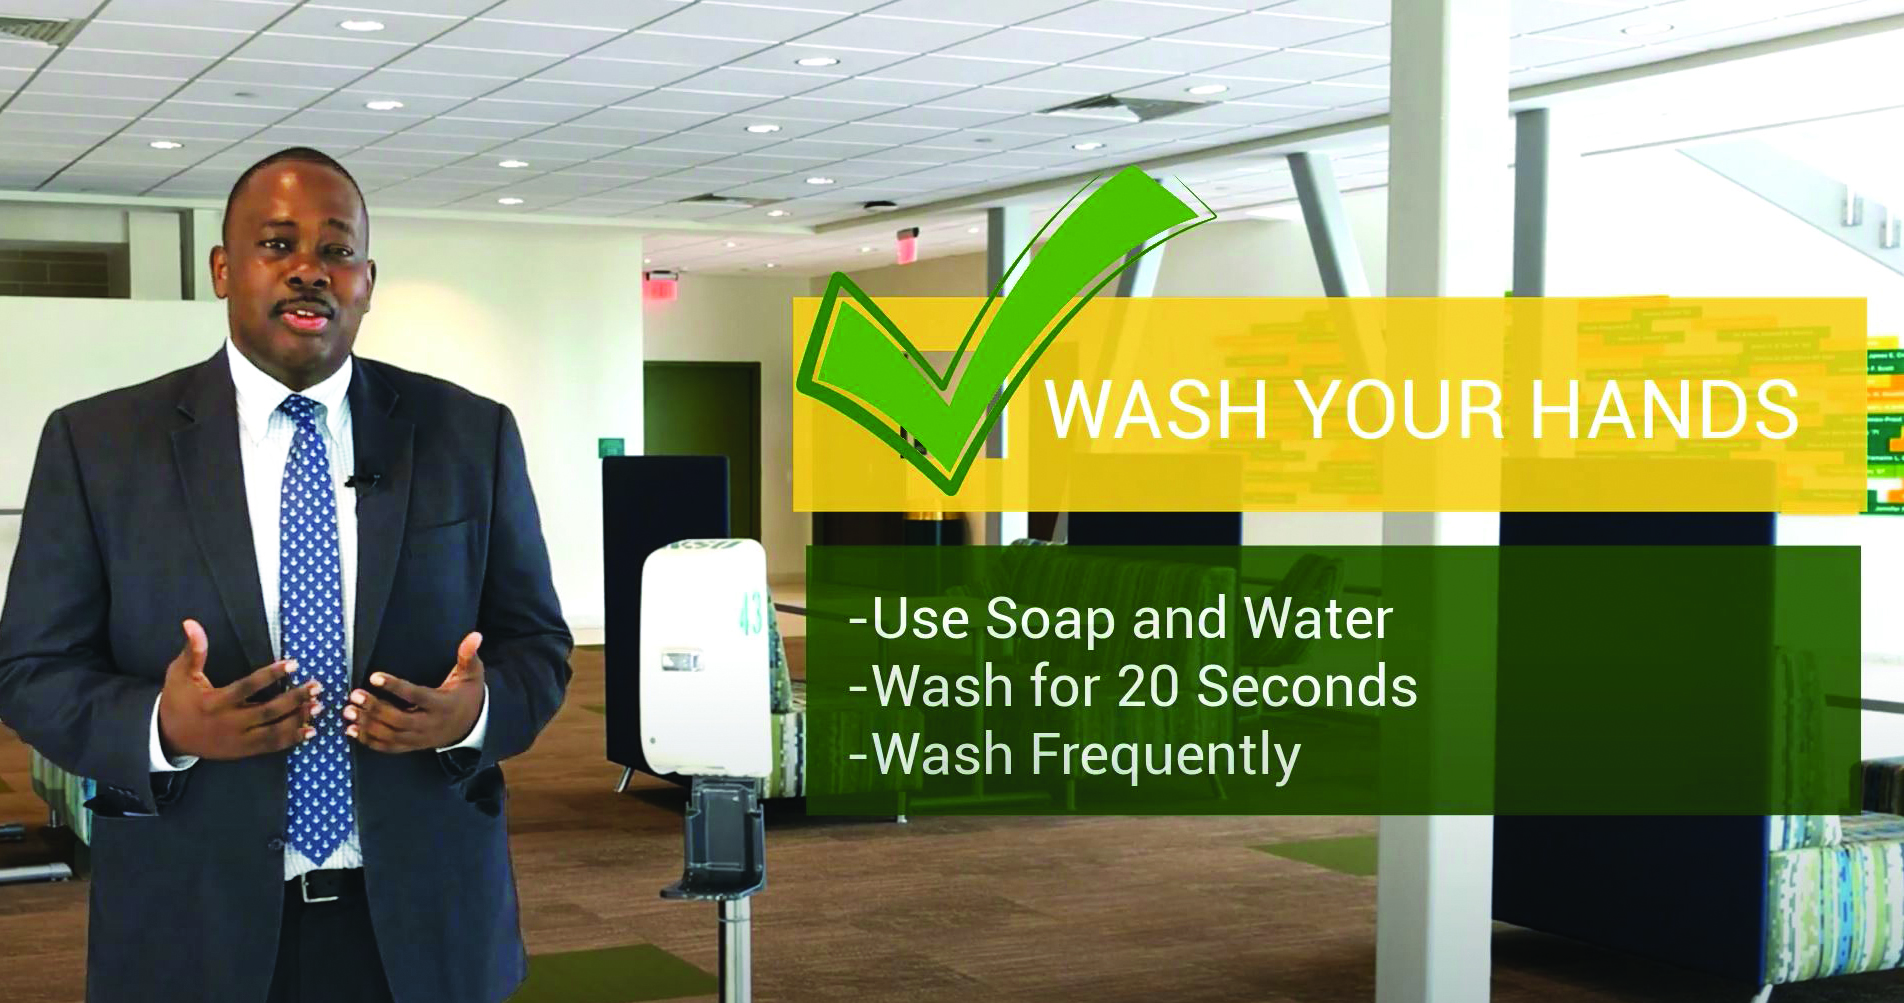 wash your hands • use soap and water • wash for 20 seconds • wash frequently